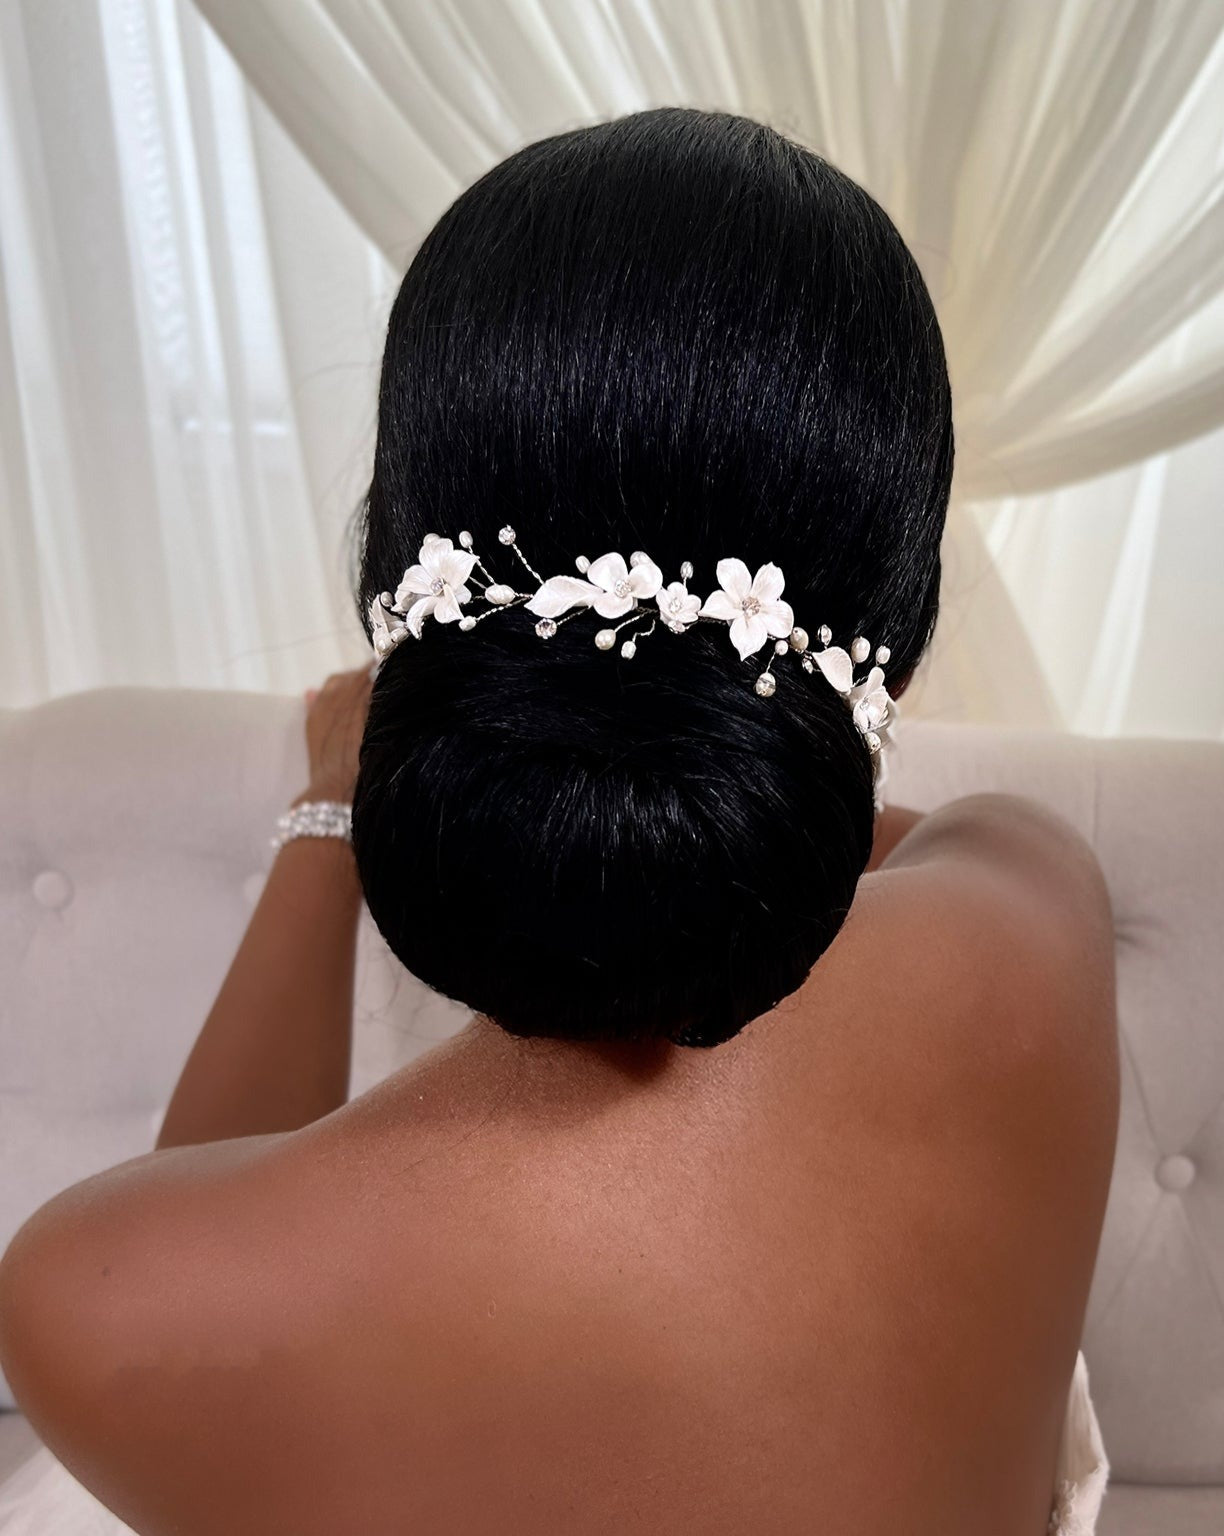 thin bridal hair vine with crystals, pearls, and porcelain flowers around an updo